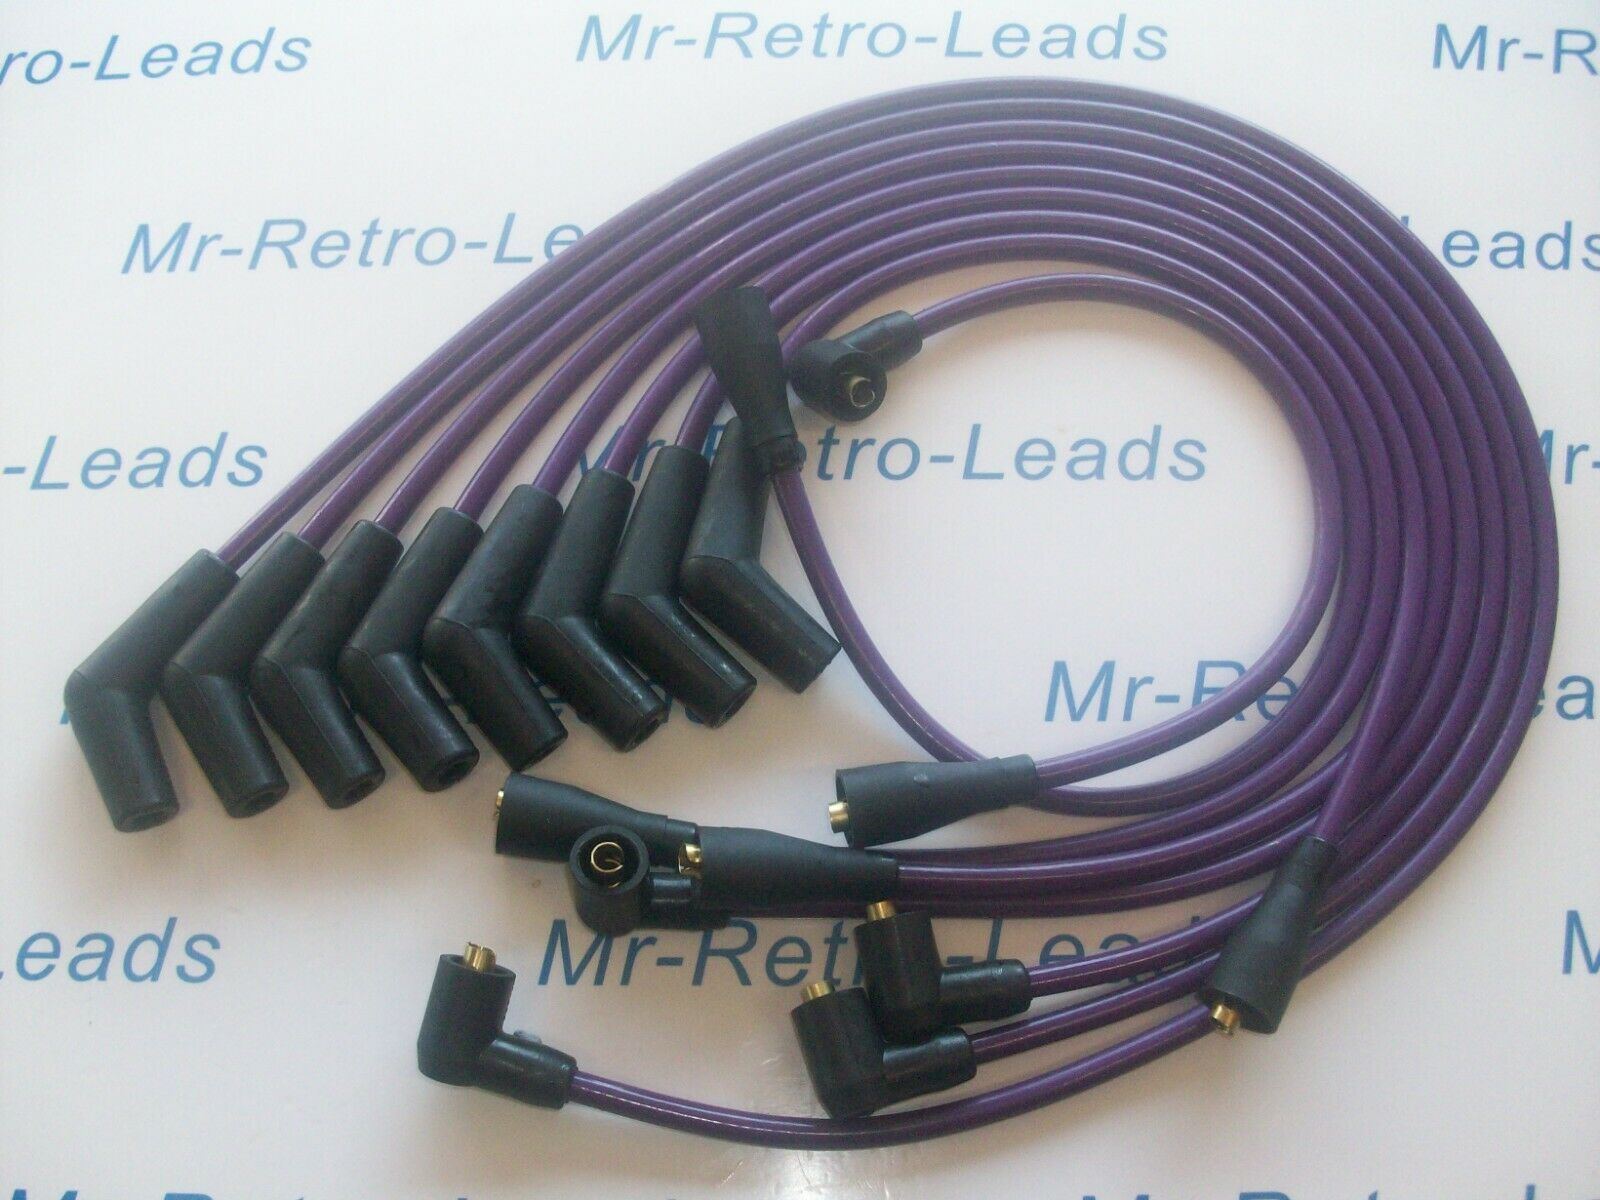 Purple 8mm Performance Ignition Leads For Tvr Chimaera V8 Lucas Distributor